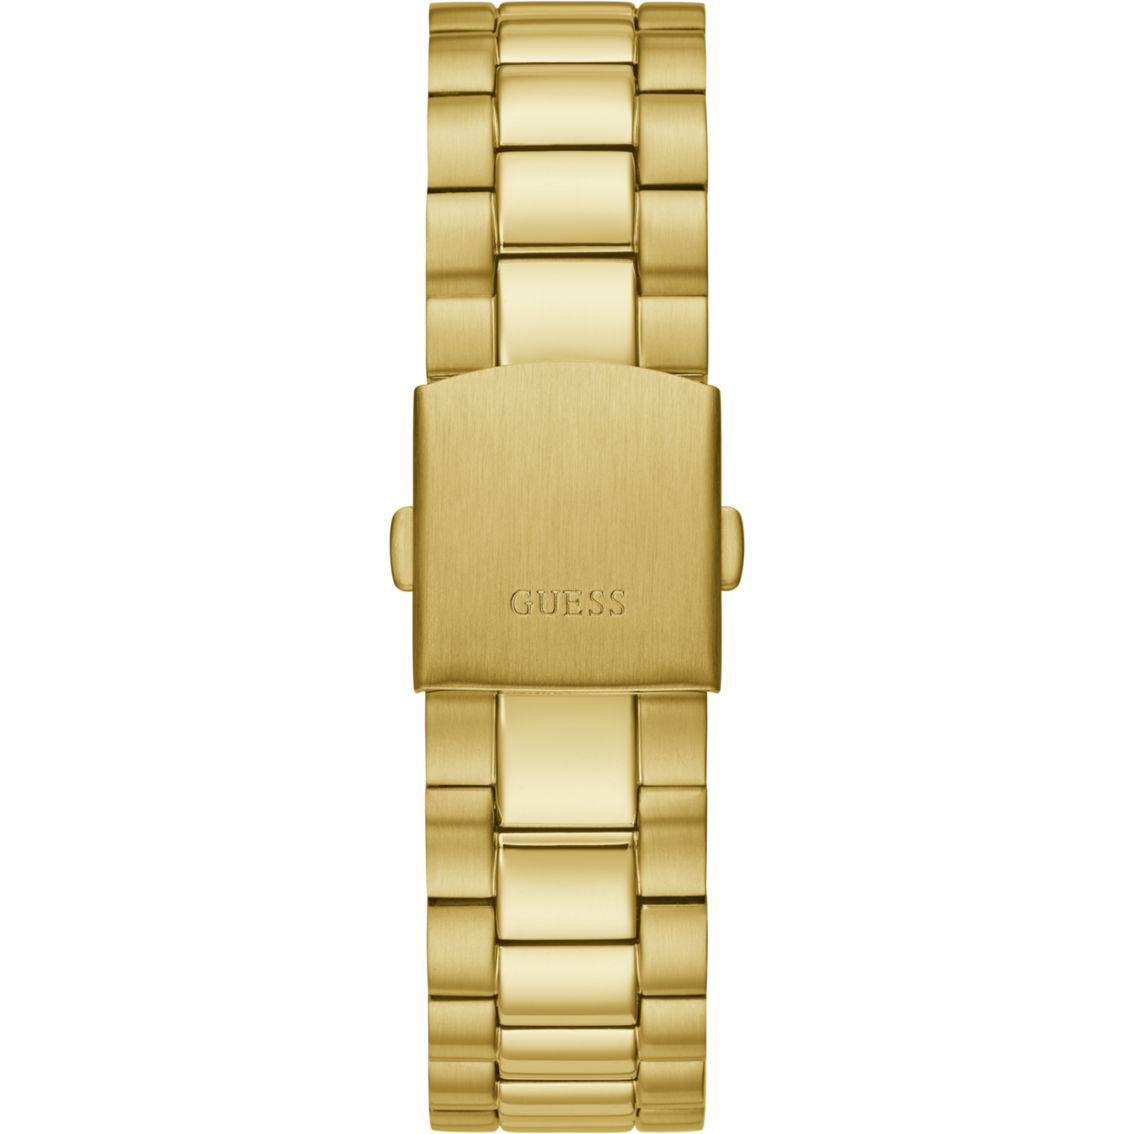 Guess Goldtone Analog Watch GW0265G2 - Image 2 of 7